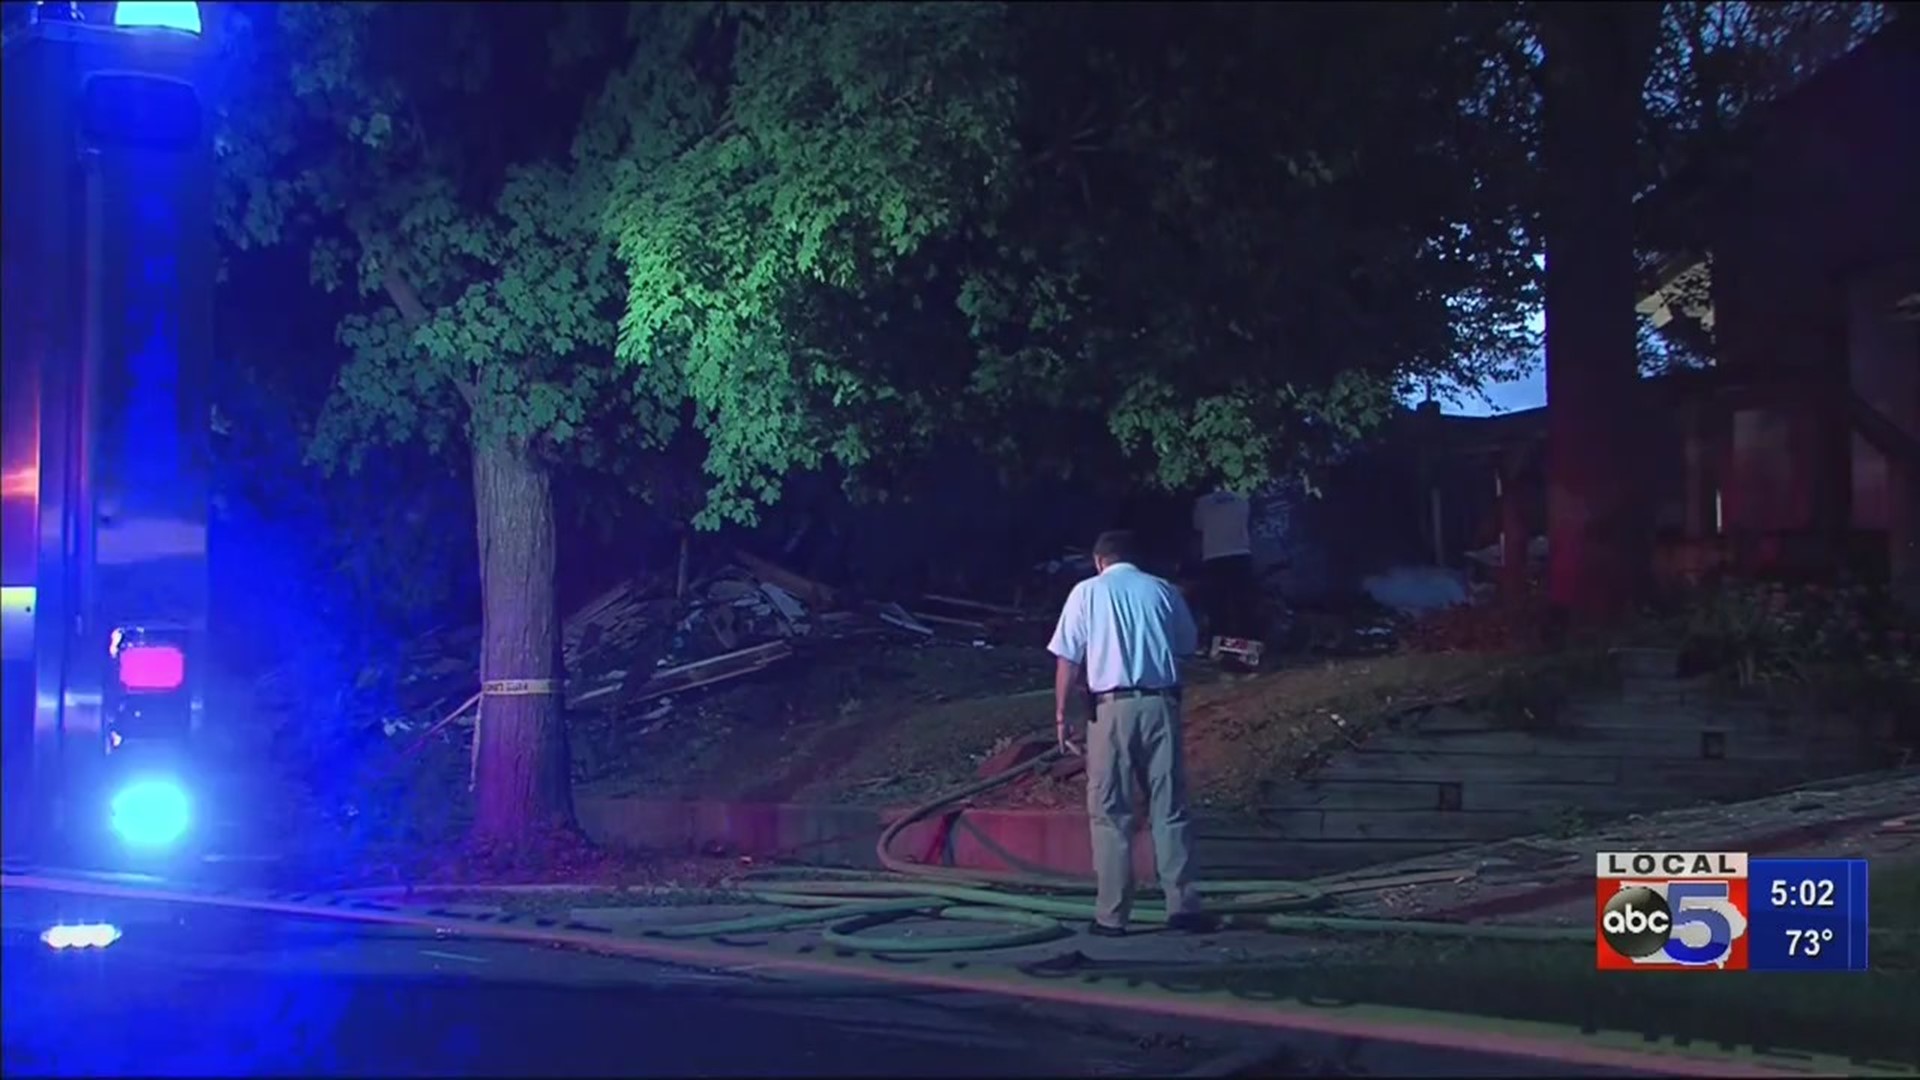 Investigation continues into Des Moines home explosion